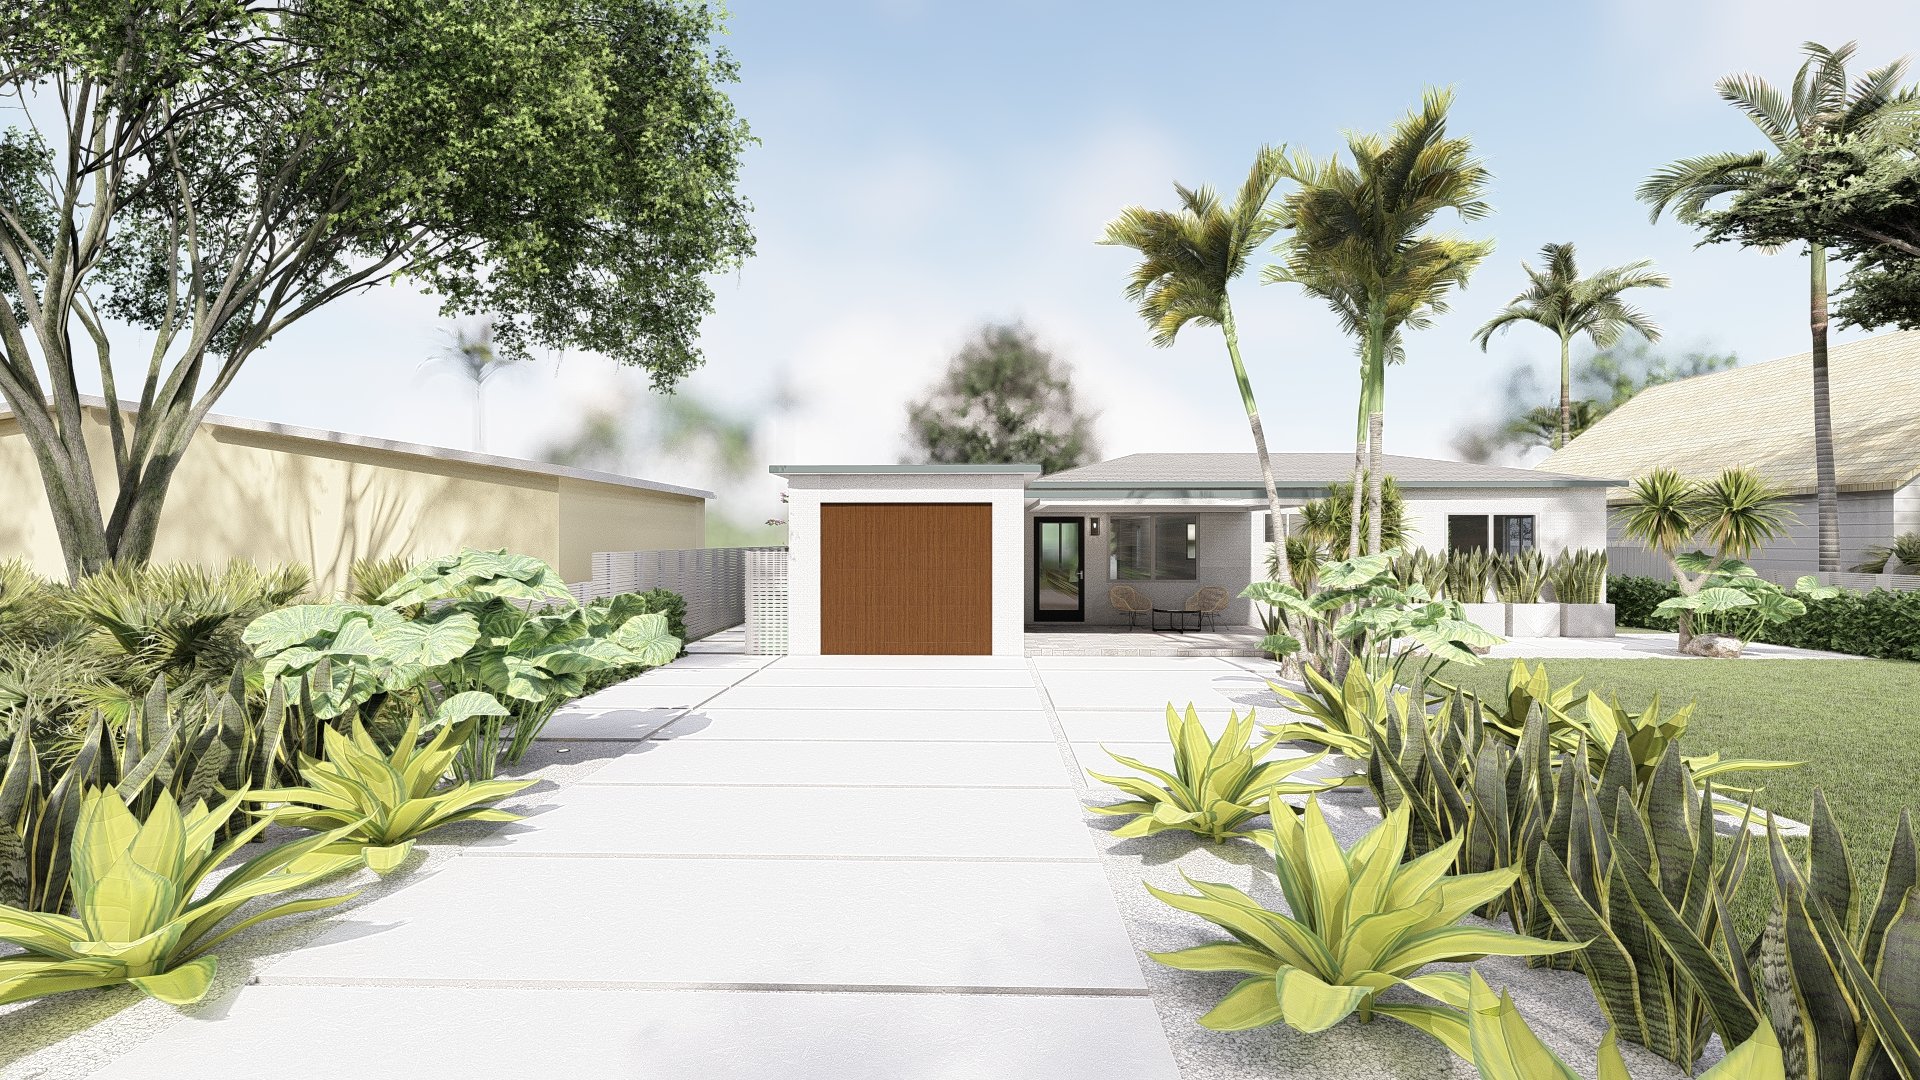 Front yard view of driveway with lush tropical plantings and garage 